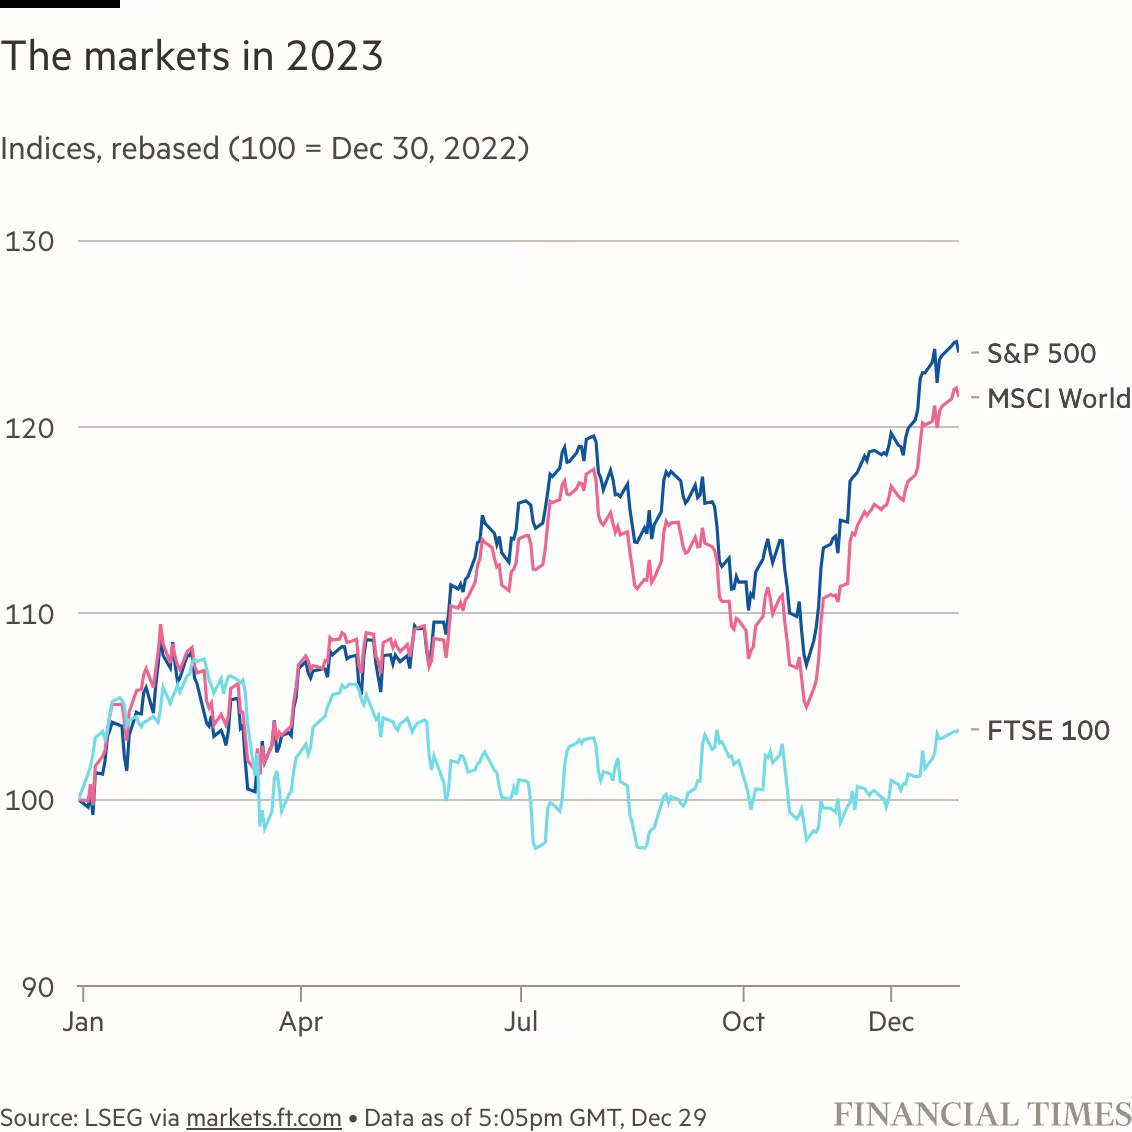 Global stock markets record best year since 2019